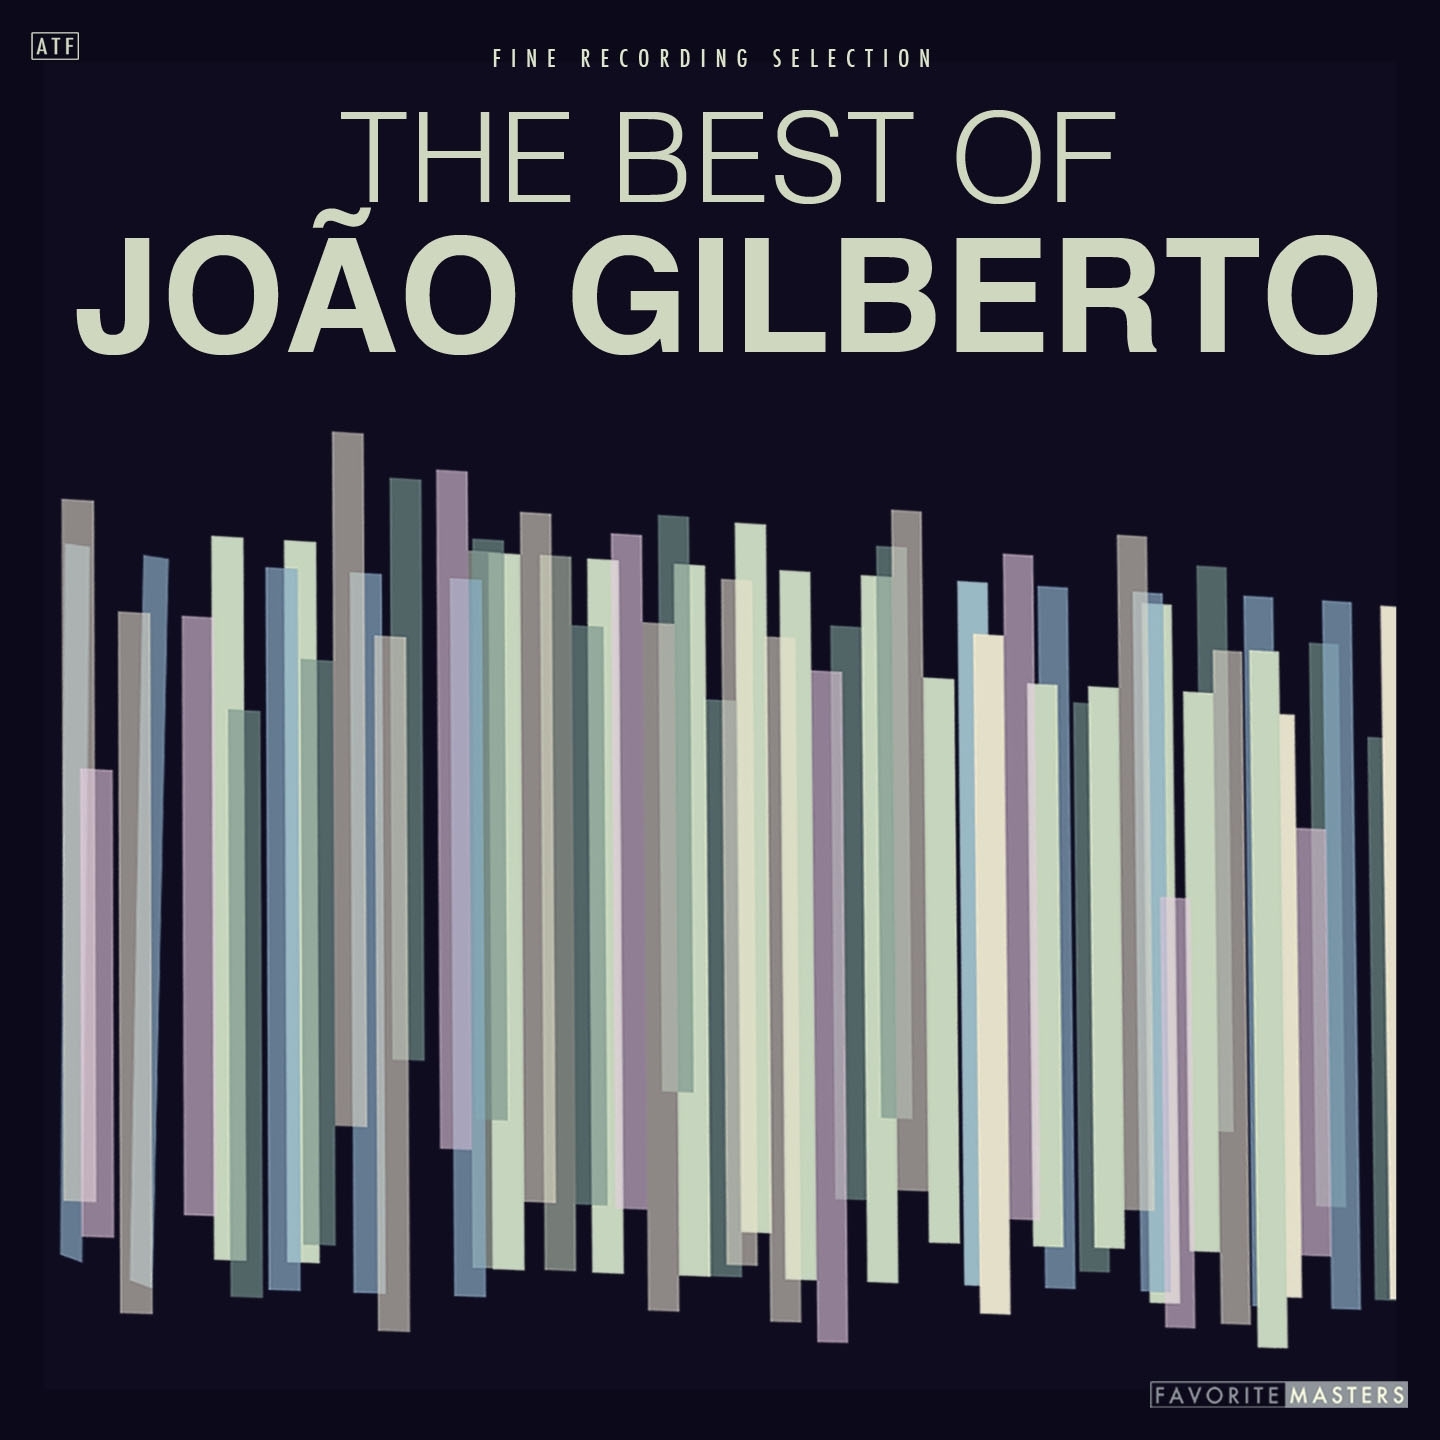 The Best Of Jo o Gilberto